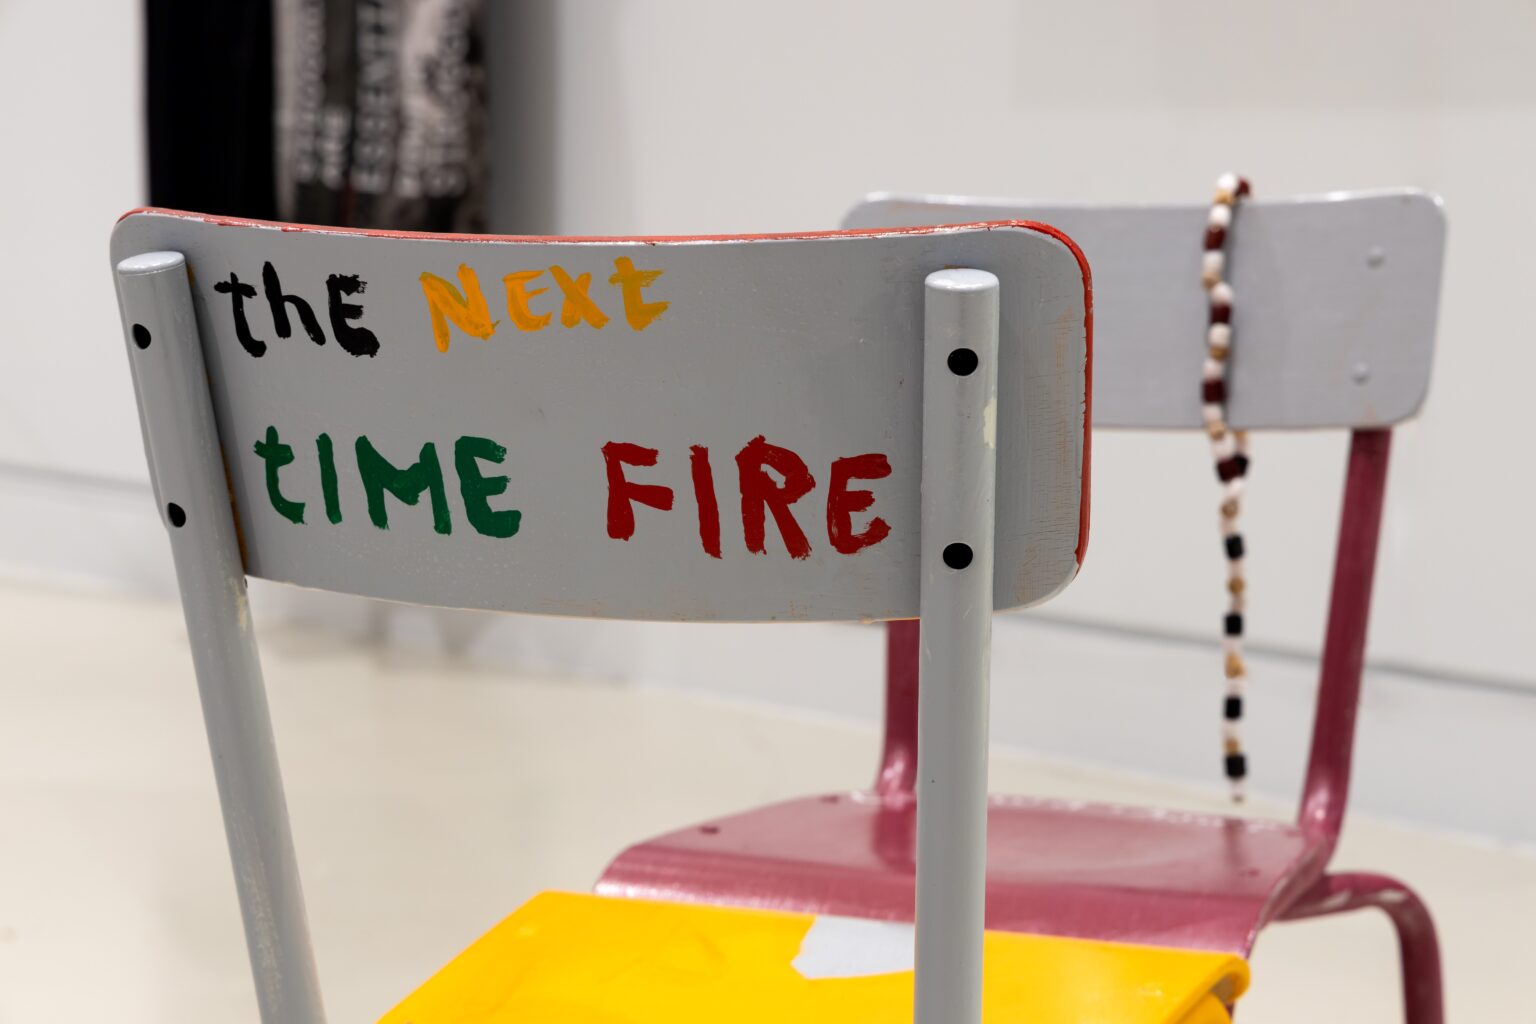 Two painted school chairs, lips of seats touching. Beads hang from the backrest of one, the other has the words 'thE Next tIME FIRE' painted on the back.